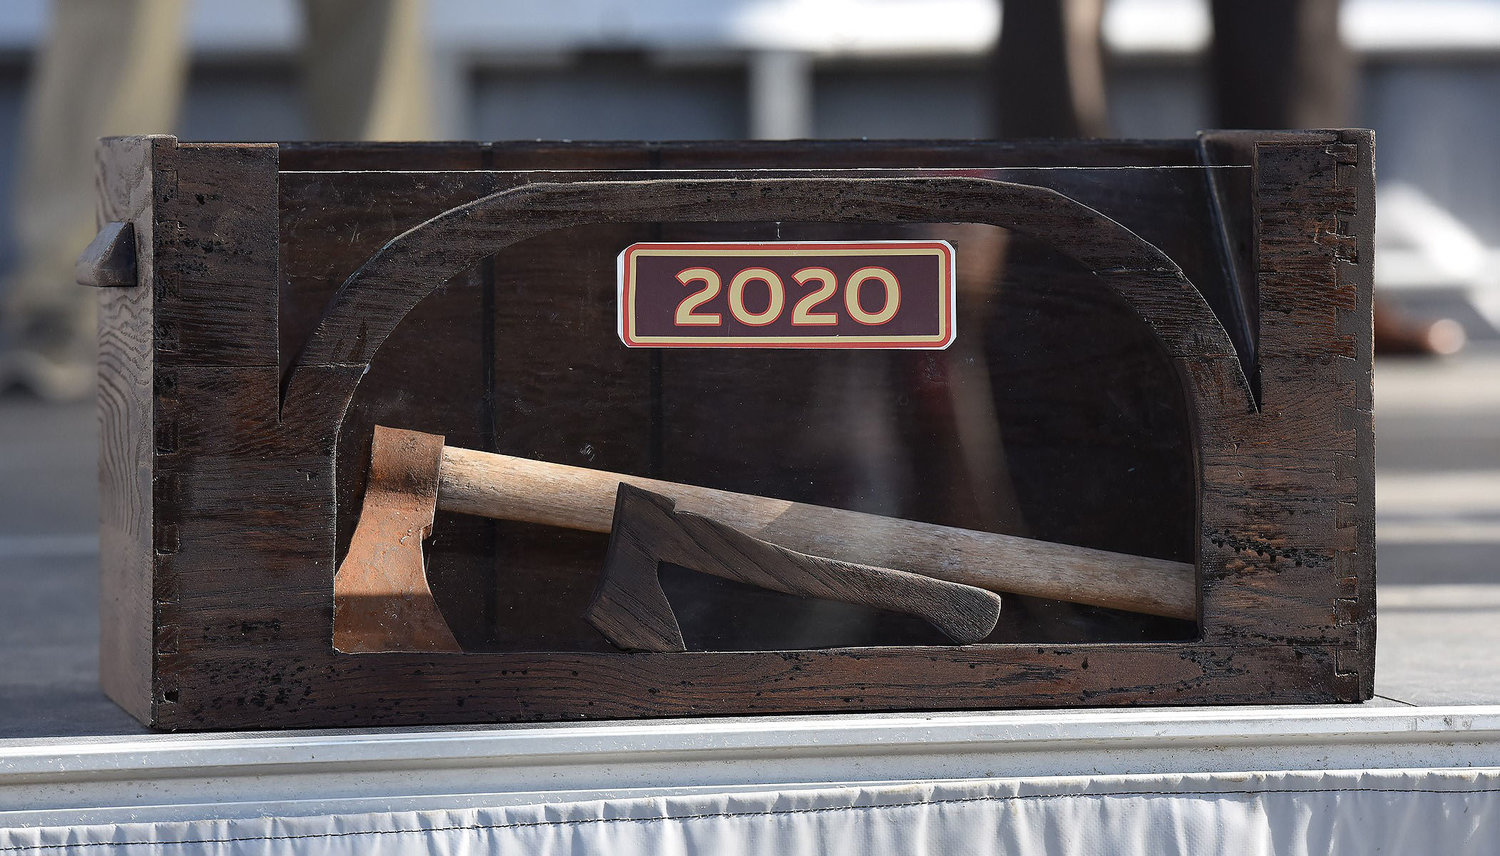 In 2020, the official Return Day ceremonies were canceled during the pandemic. A downsized event, however, was quickly put together and there was a ceremonial burial of the hatchet.